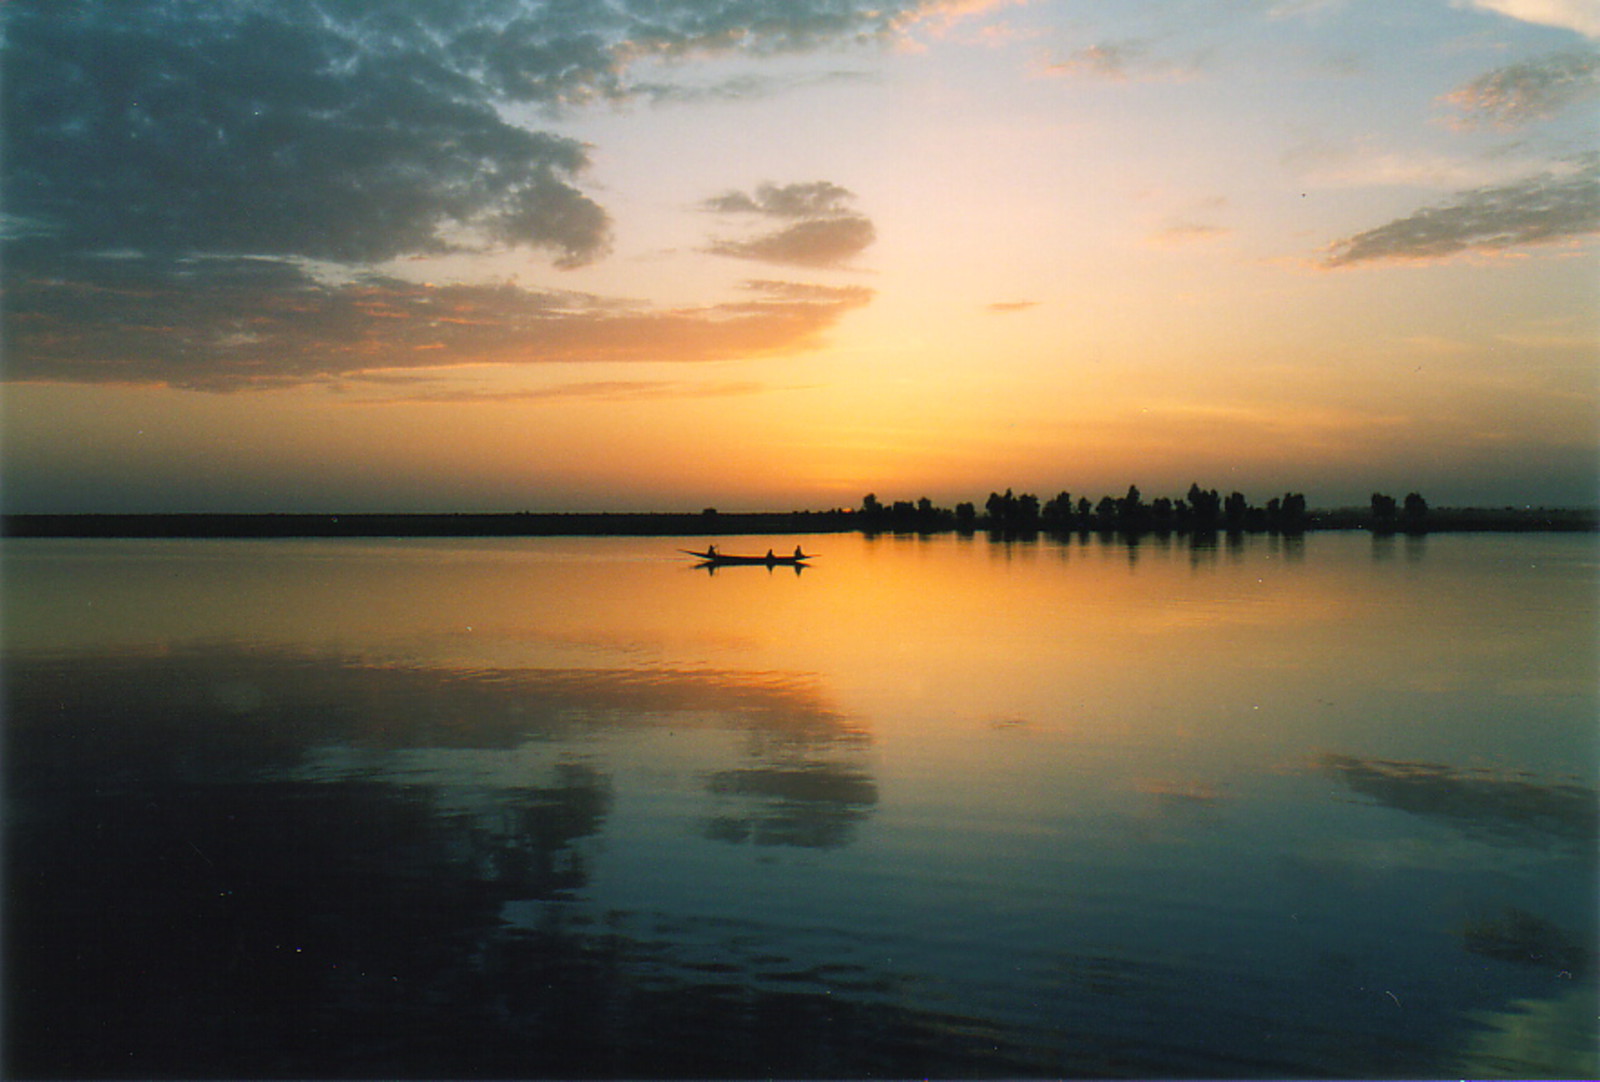 Sunset over the River Niger at Tonka